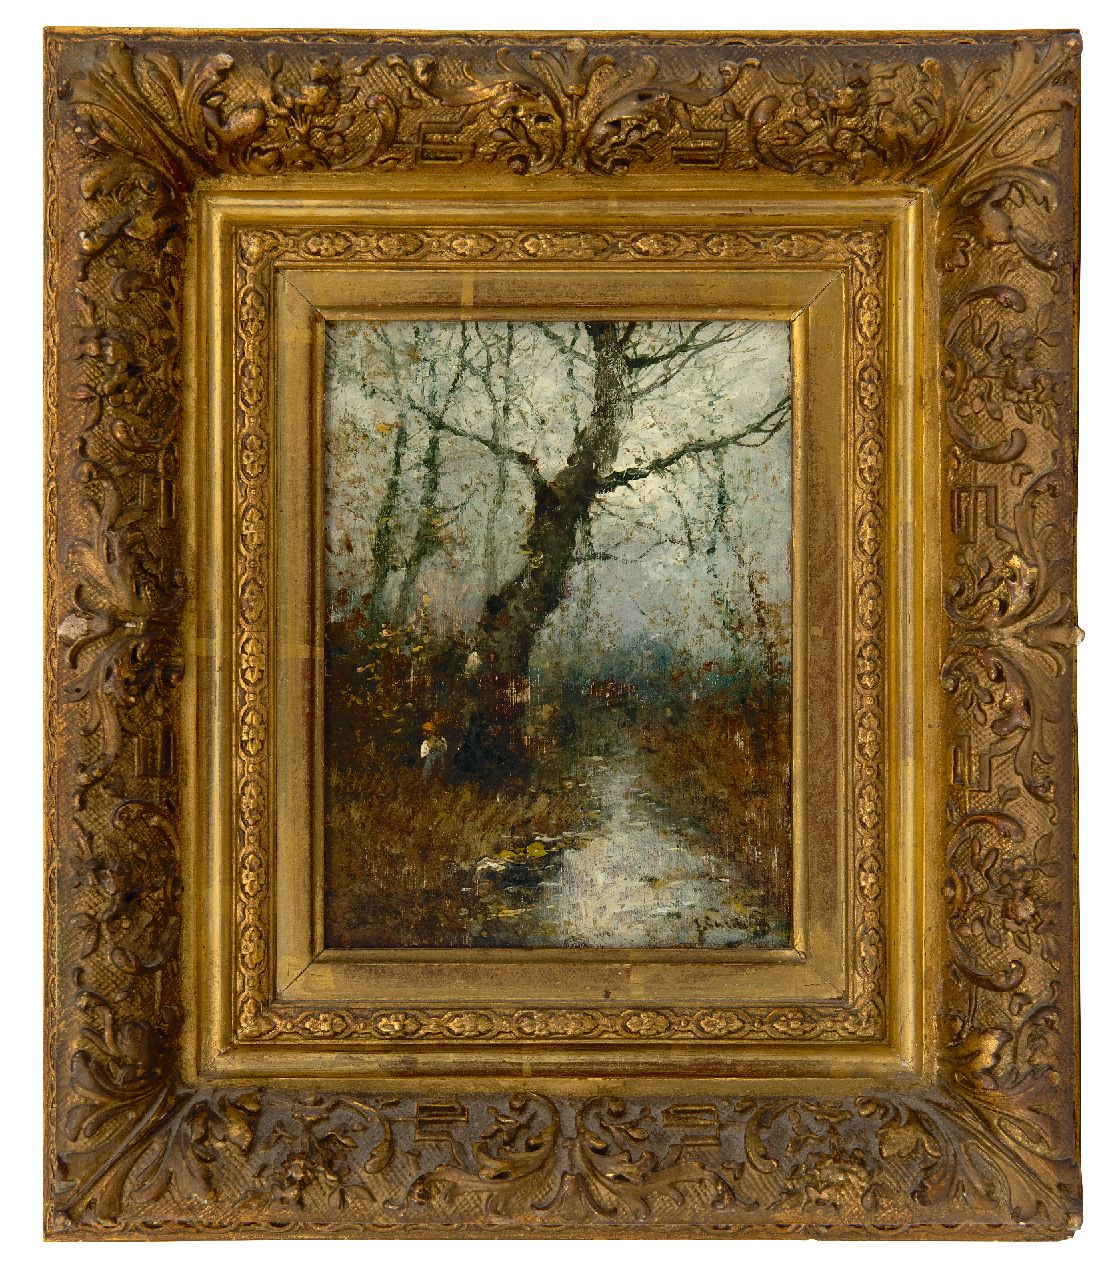 Jungblut J.  | Johann Jungblut | Paintings offered for sale | Figure in an autumn forest (pendant winter), oil on panel 16.2 x 11.7 cm, signed l.r.  J. Sander [pseudoniem]